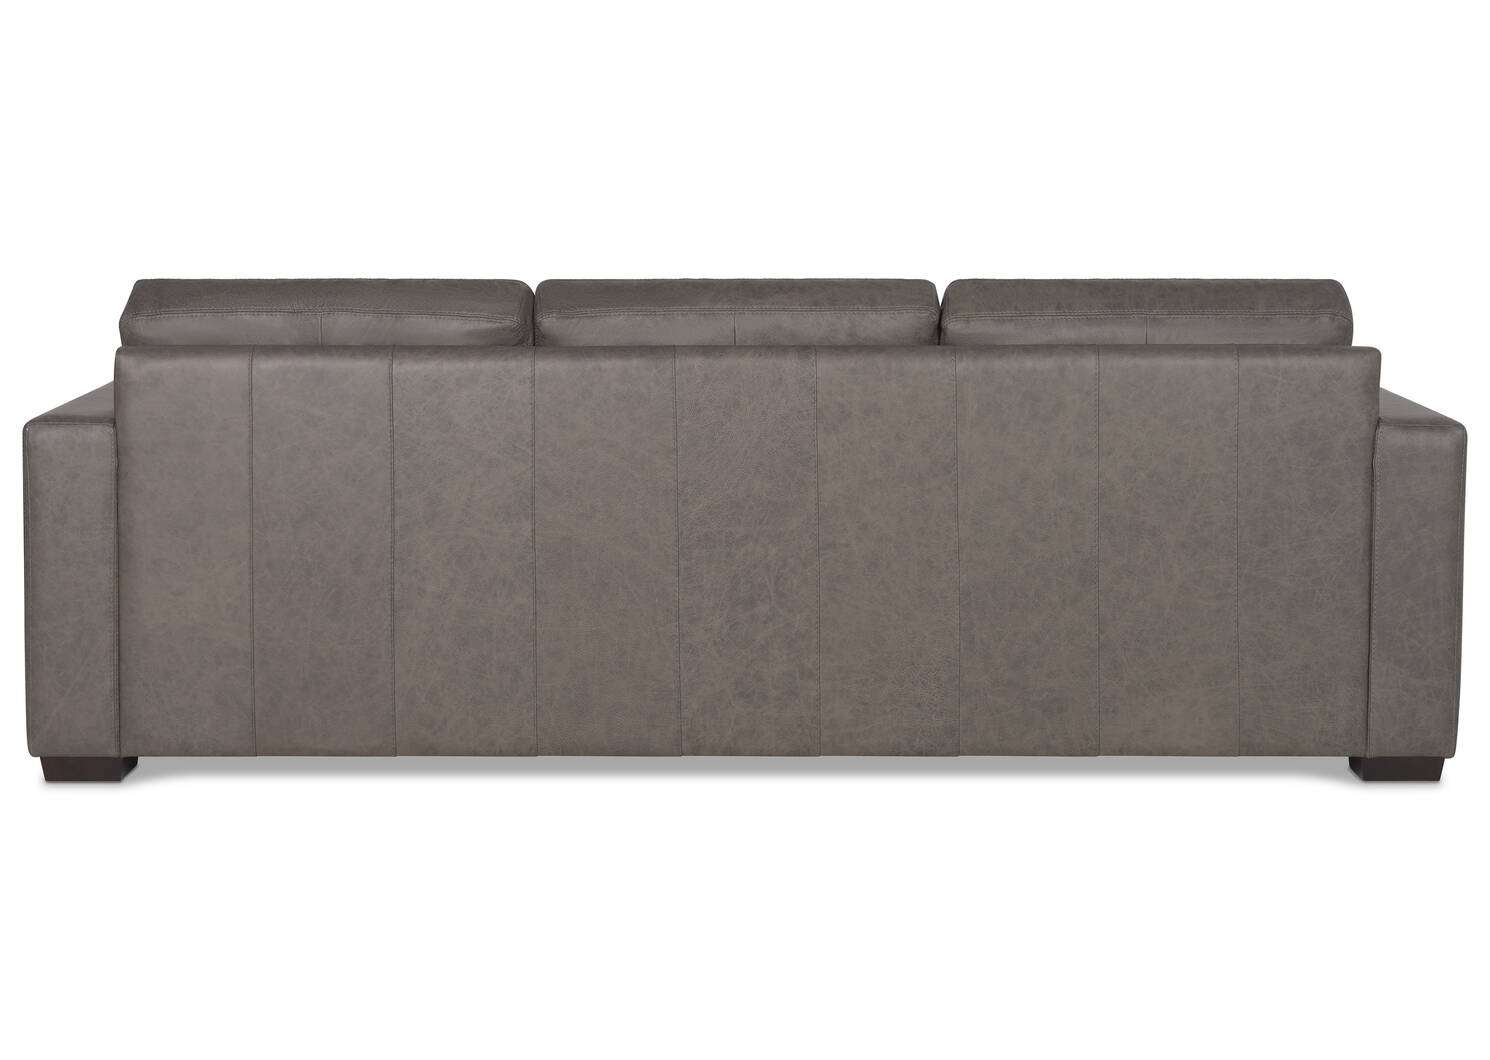 Brewer Leather Sofa -Piper Thunder